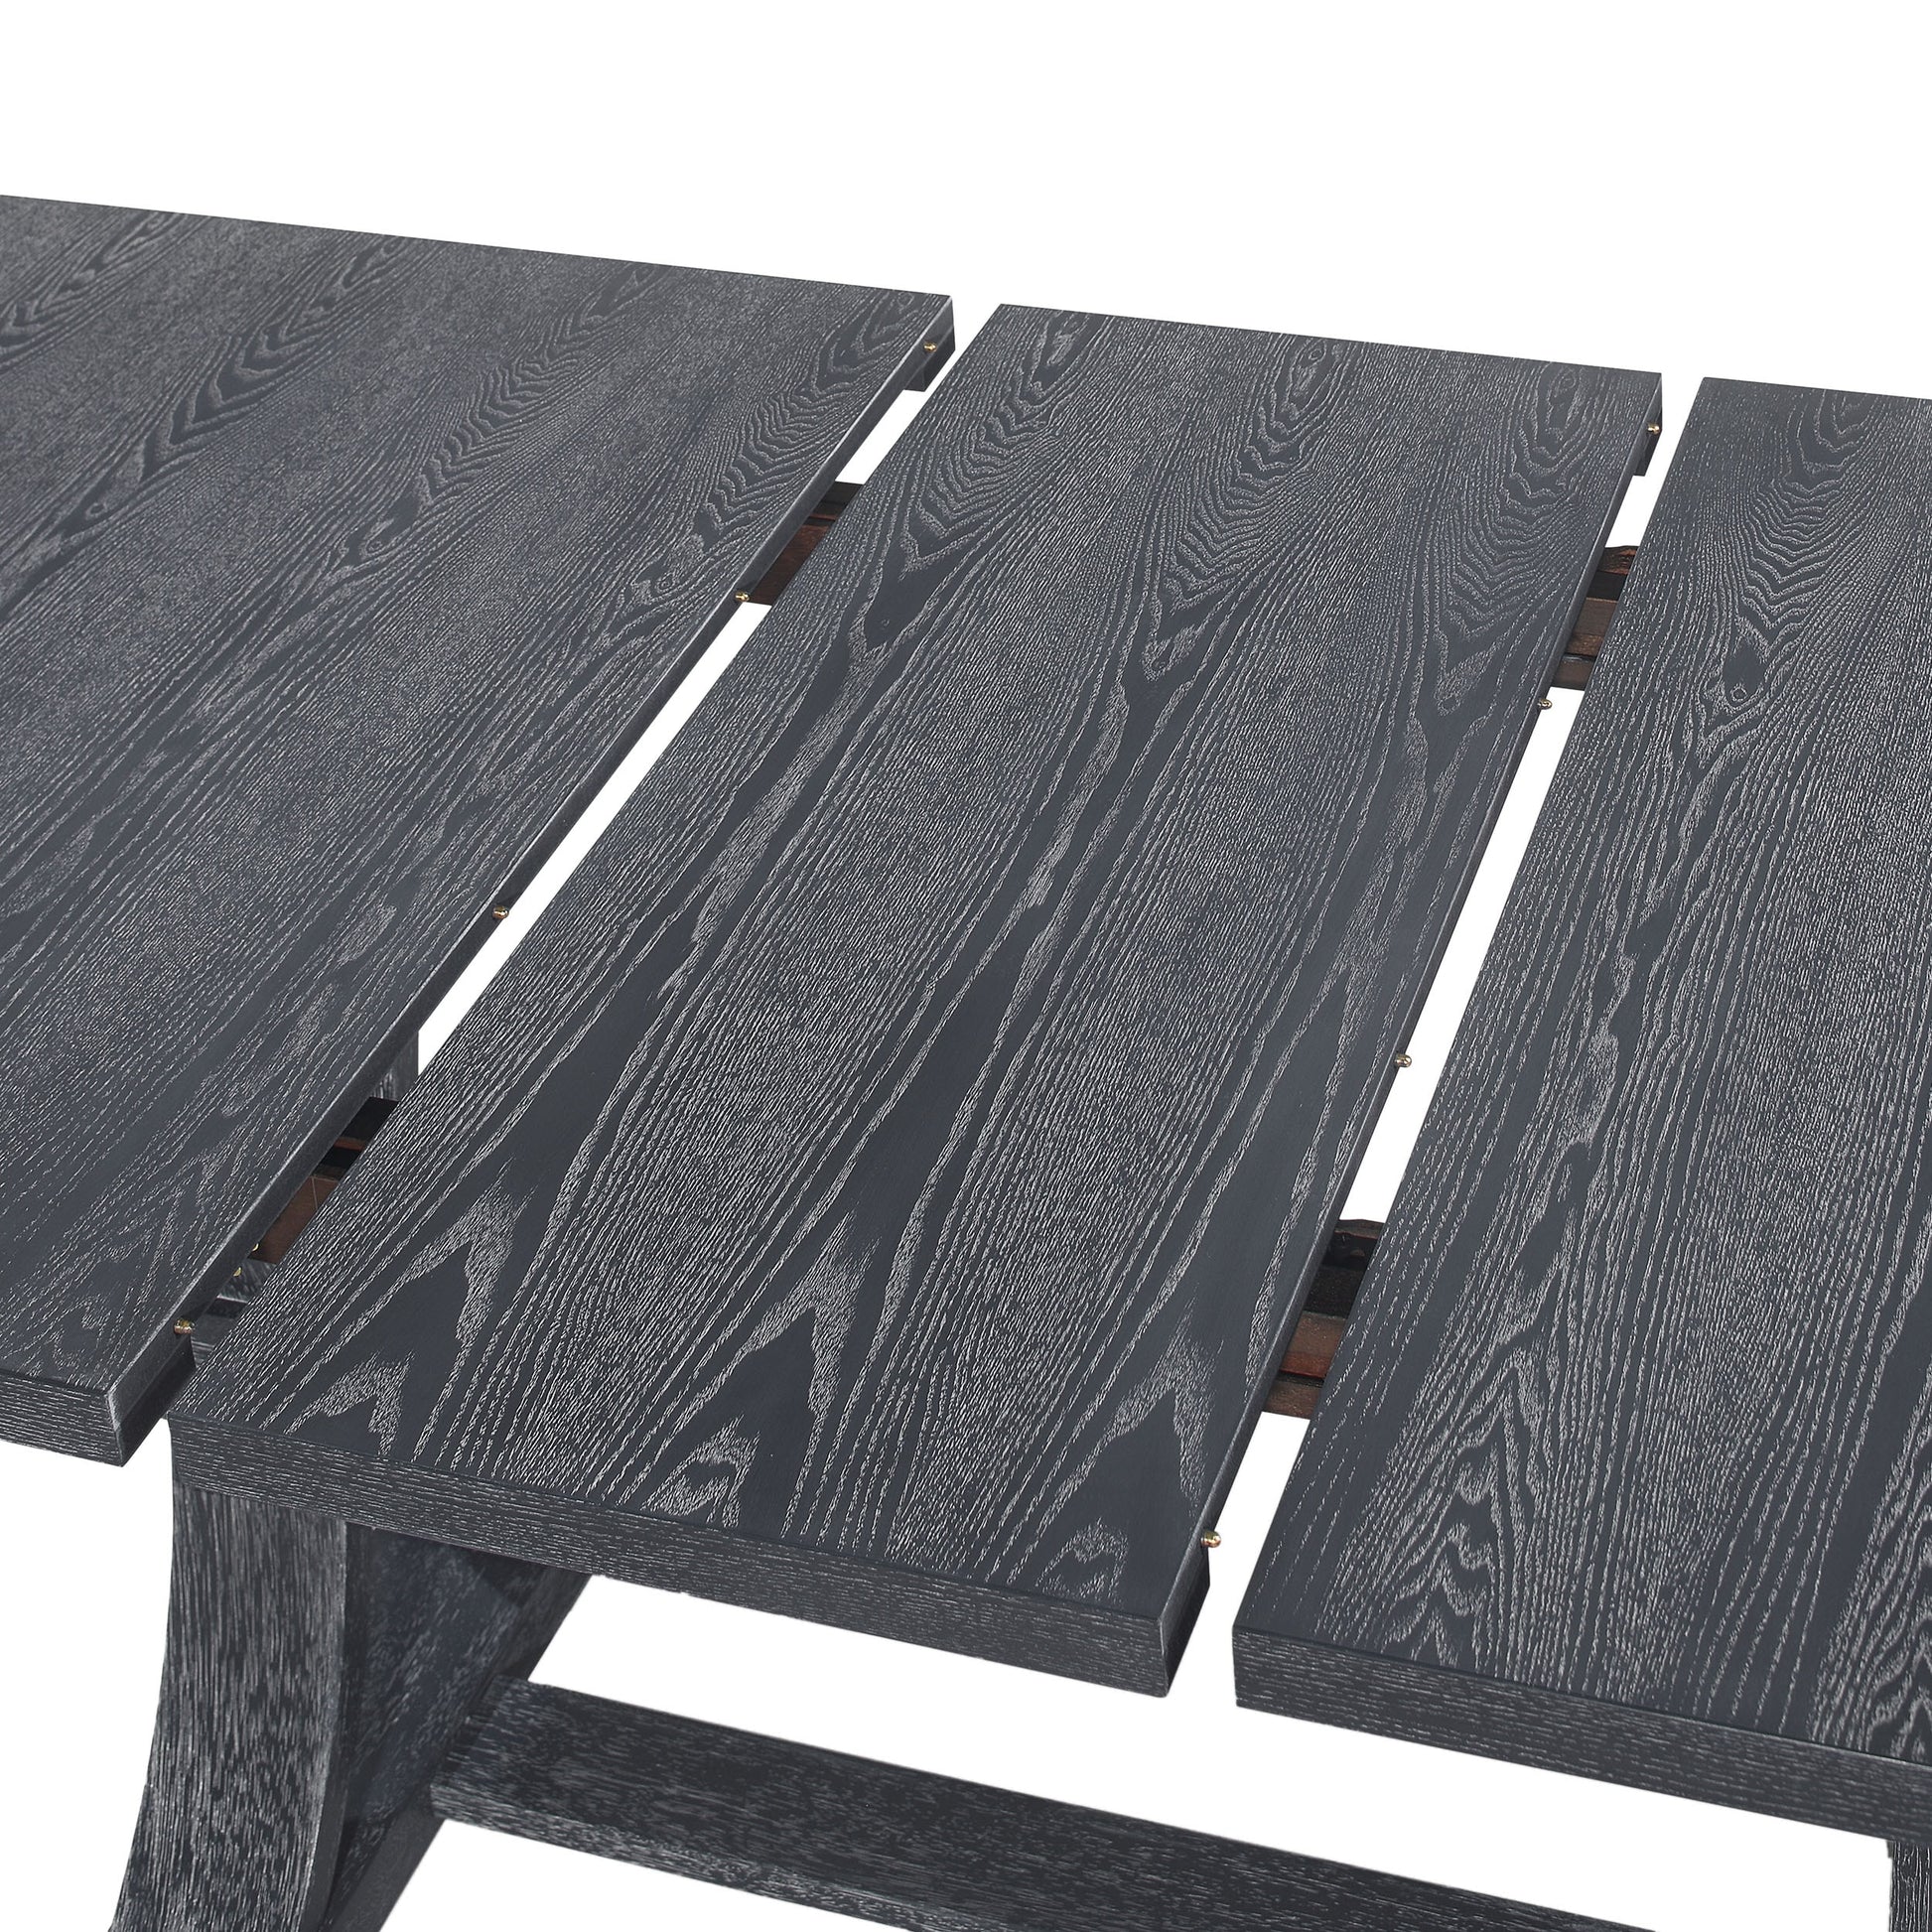 Bellion Wood Expandable Dining Table by